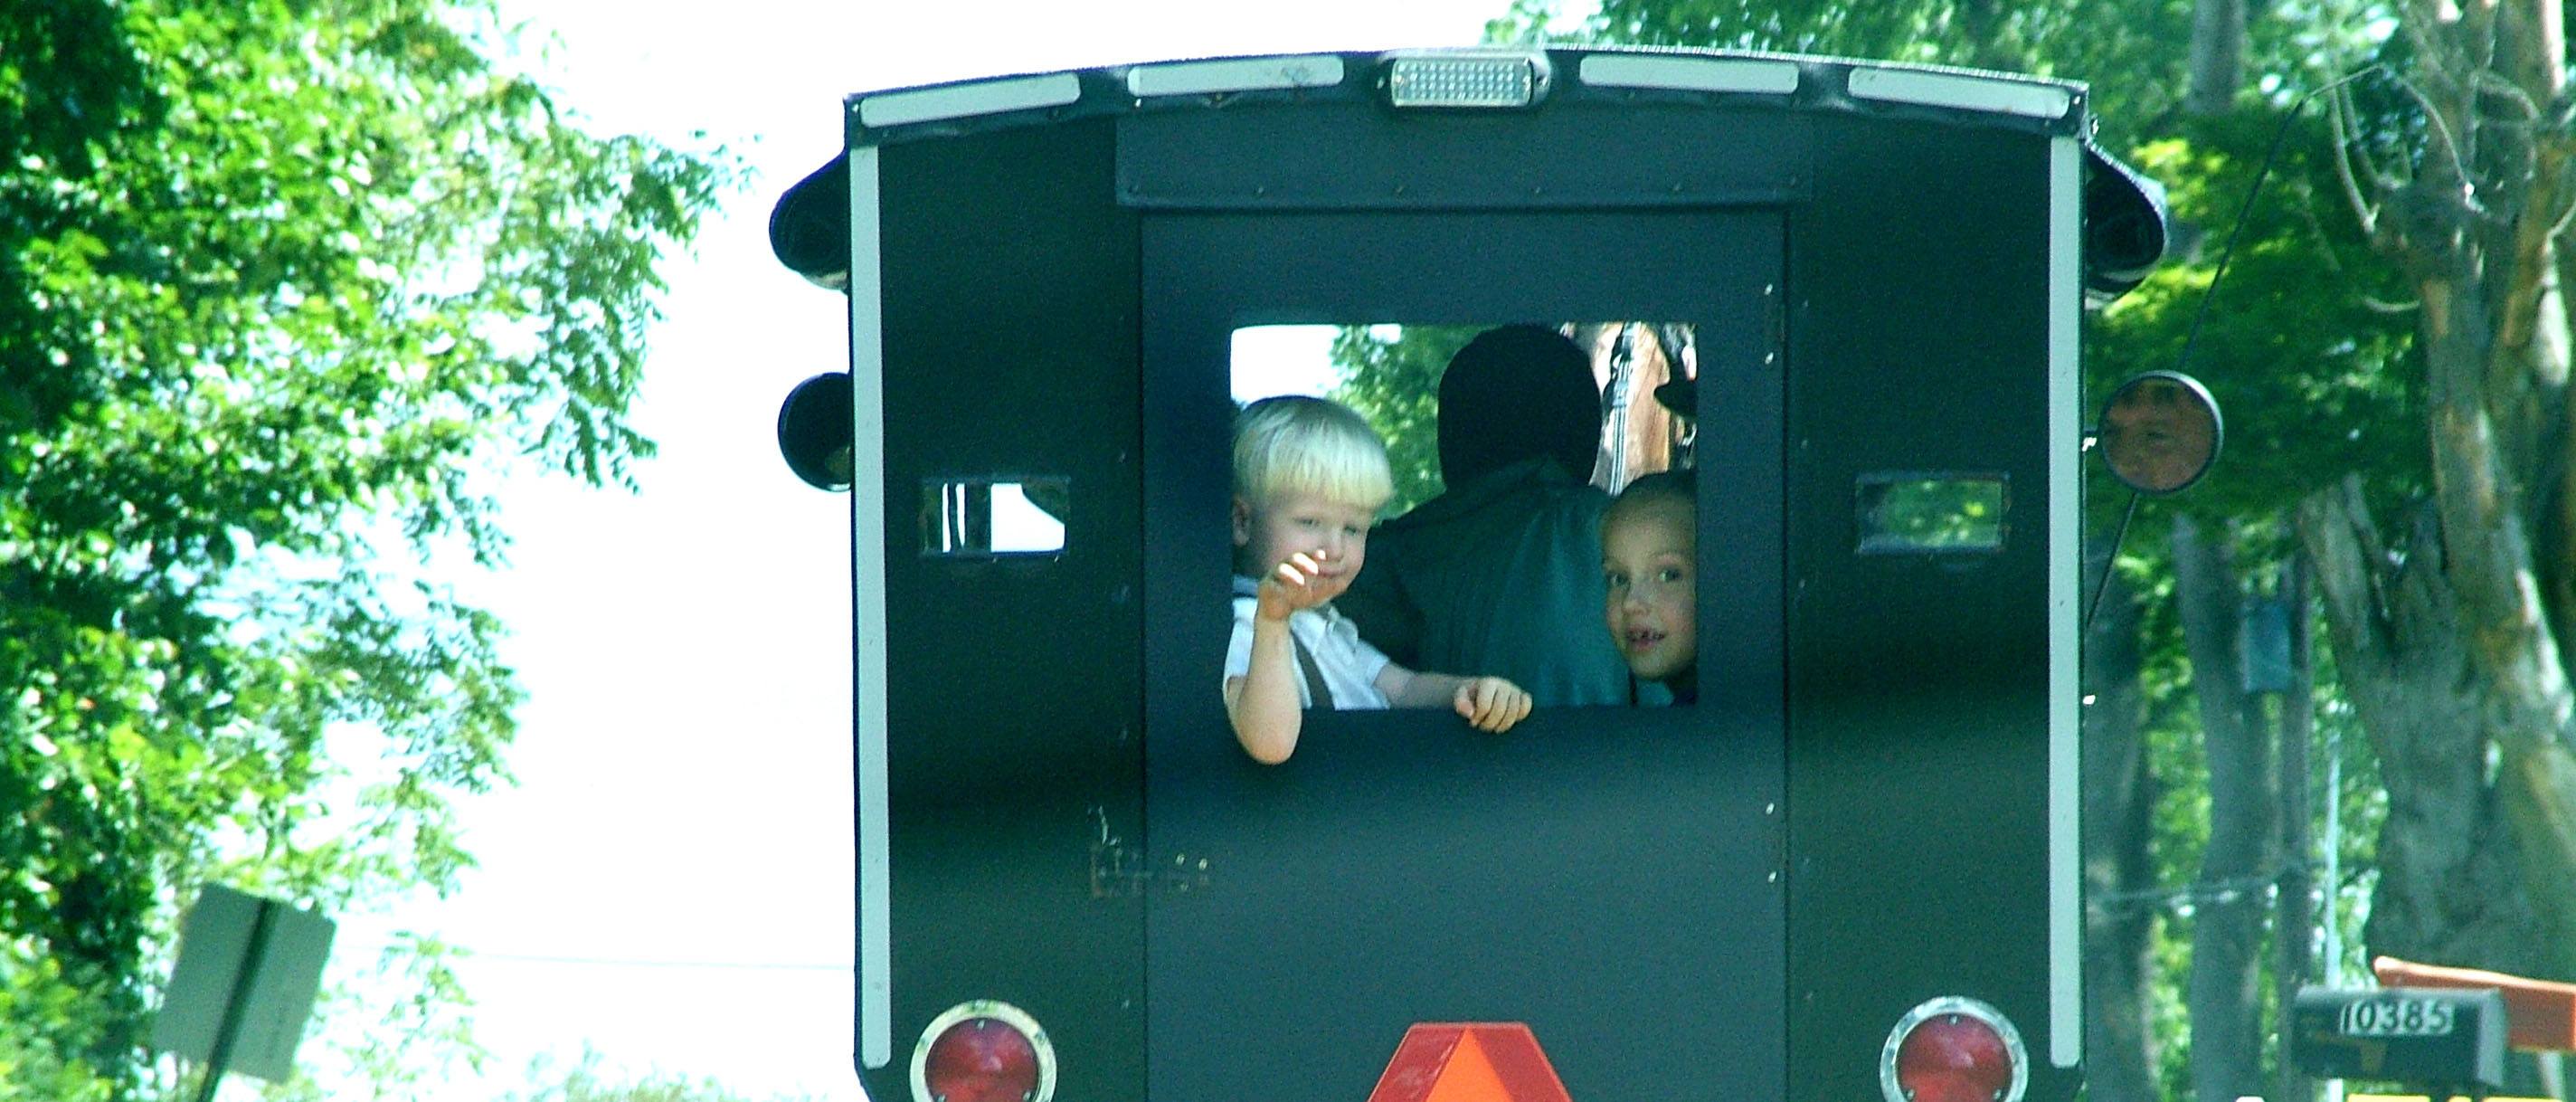 Children peering out of the back window of a buggy